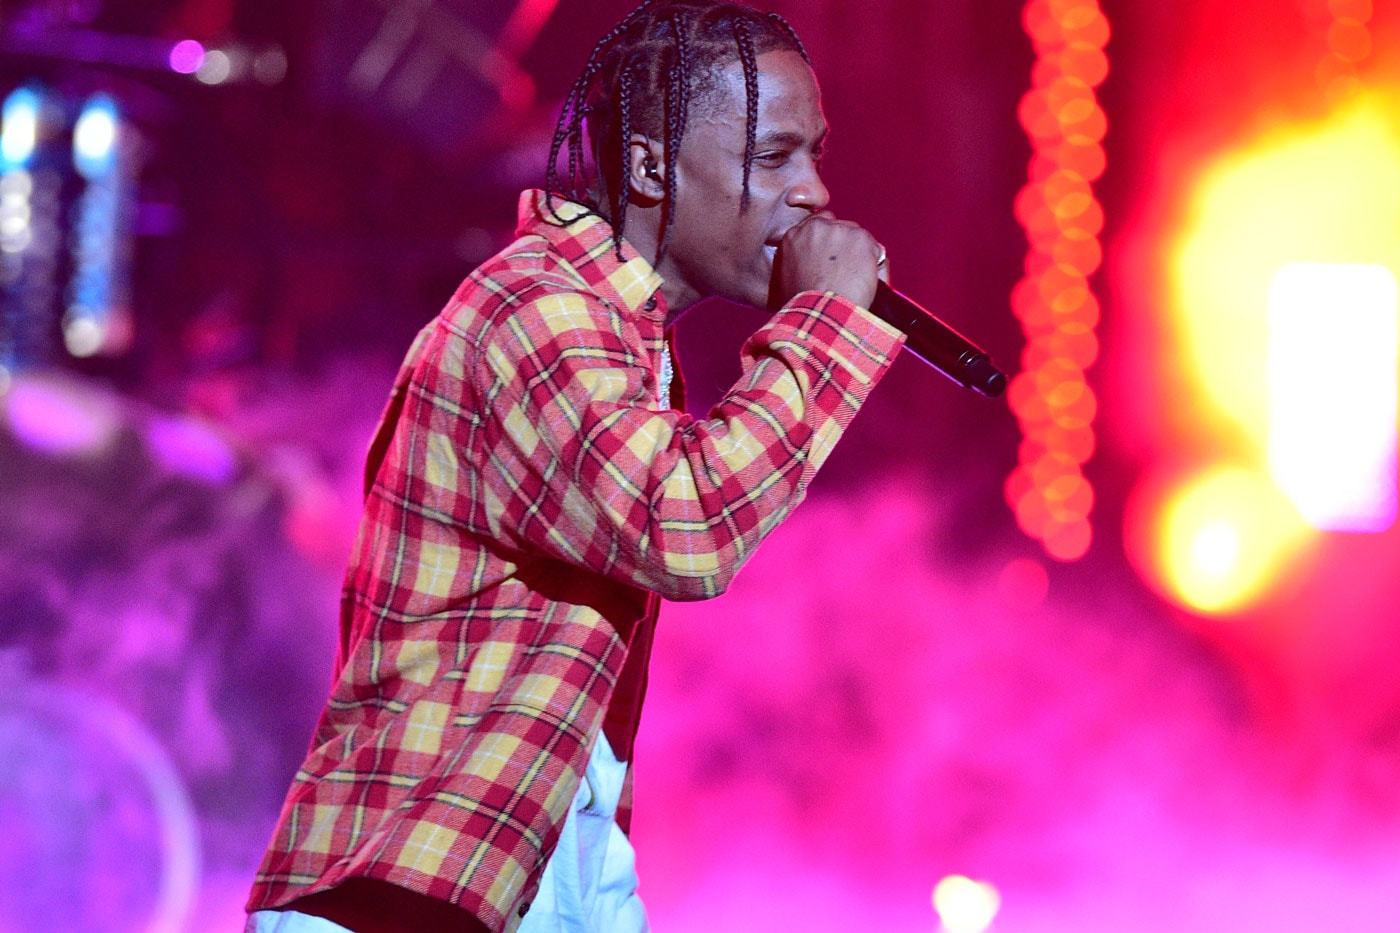 ‘Rodeo’ Artwork Photographer Reveals Meaning Behind the Travi$ Scott Action Figure